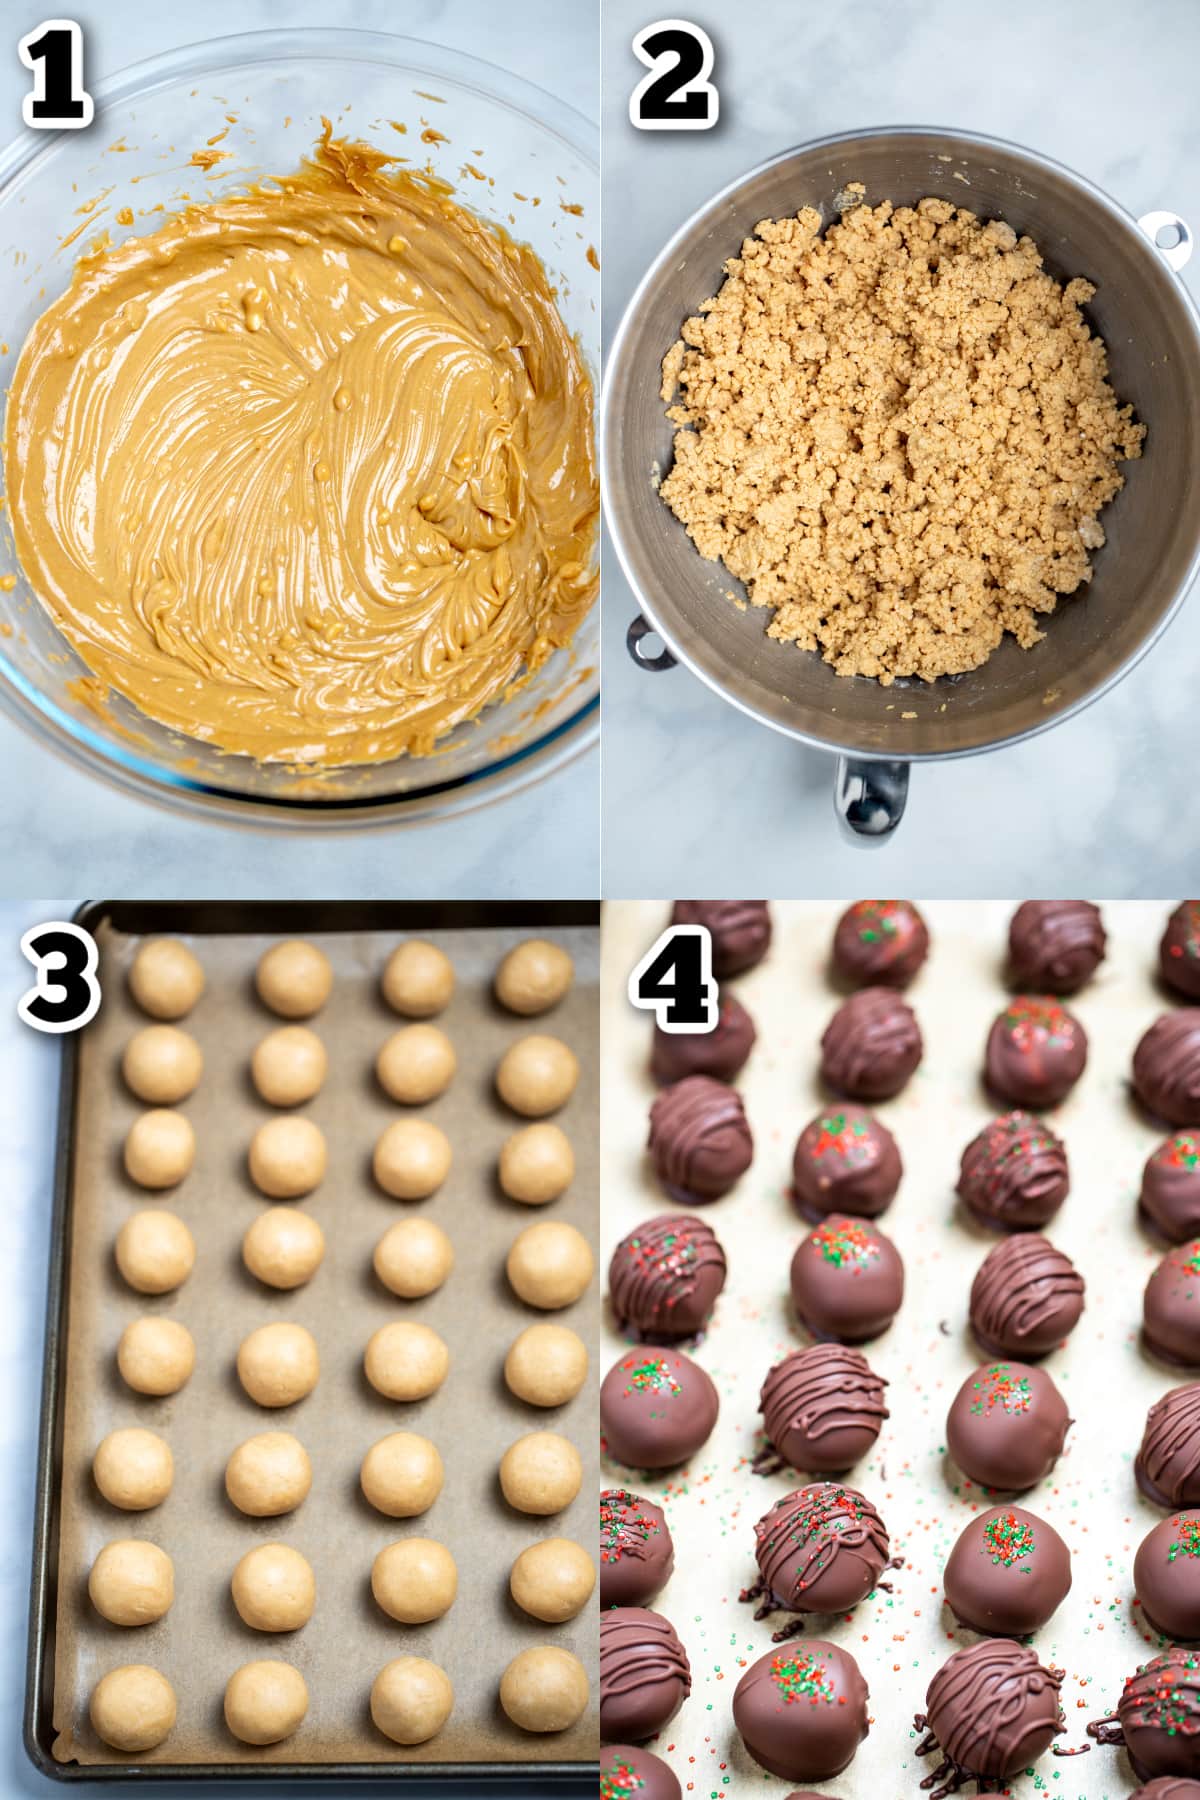 Step by step photos for how to make chocolate covered peanut butter balls.